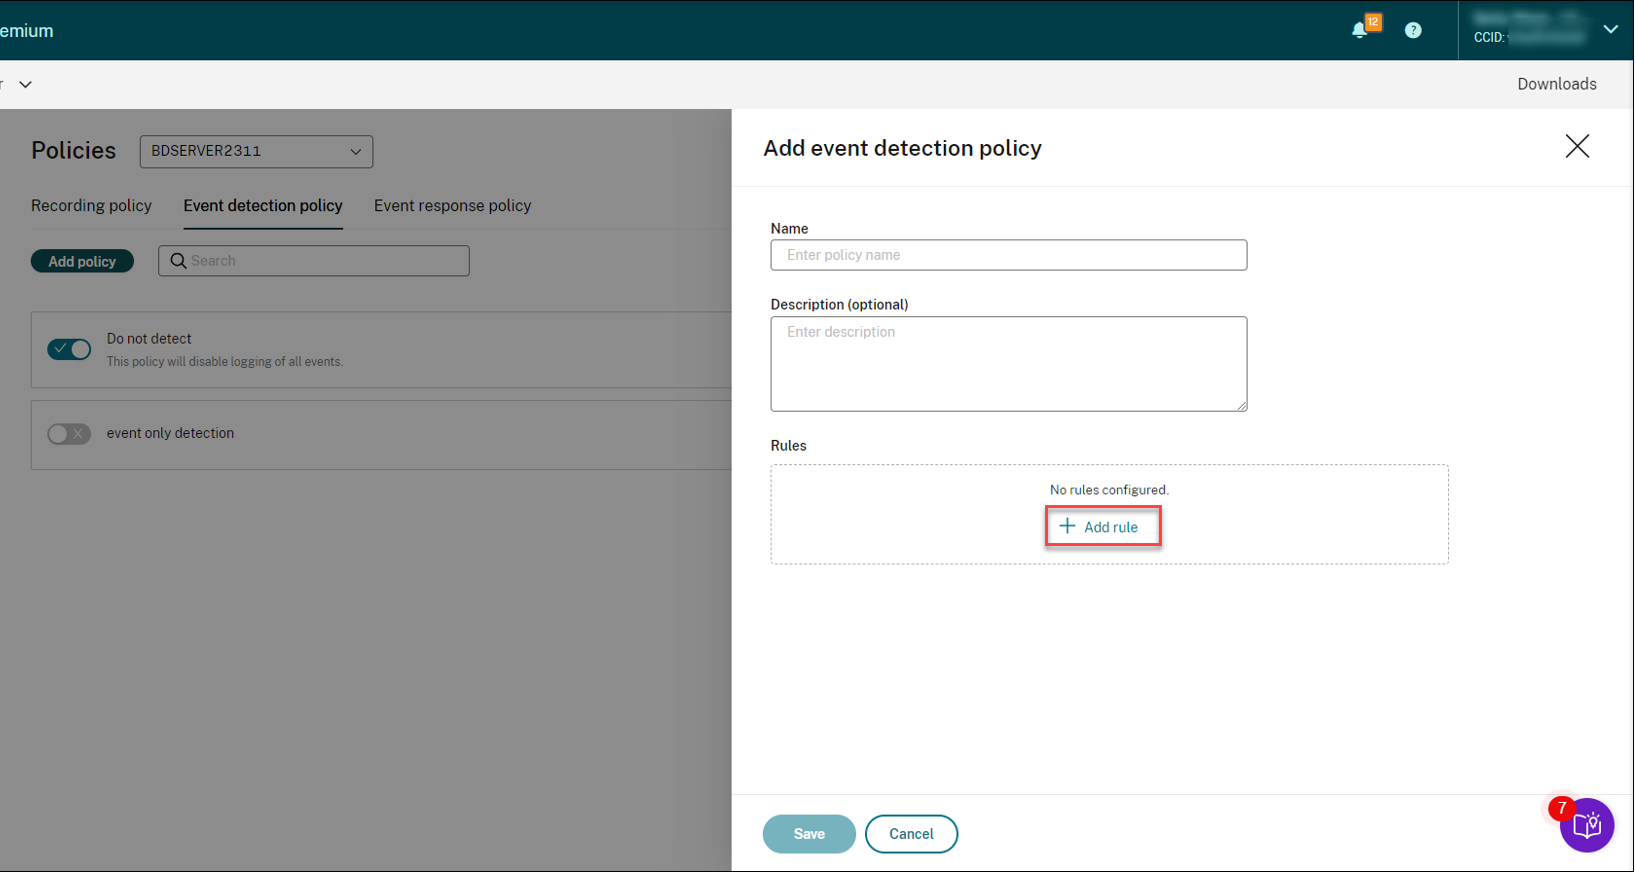 Adding a rule for an event detection policy